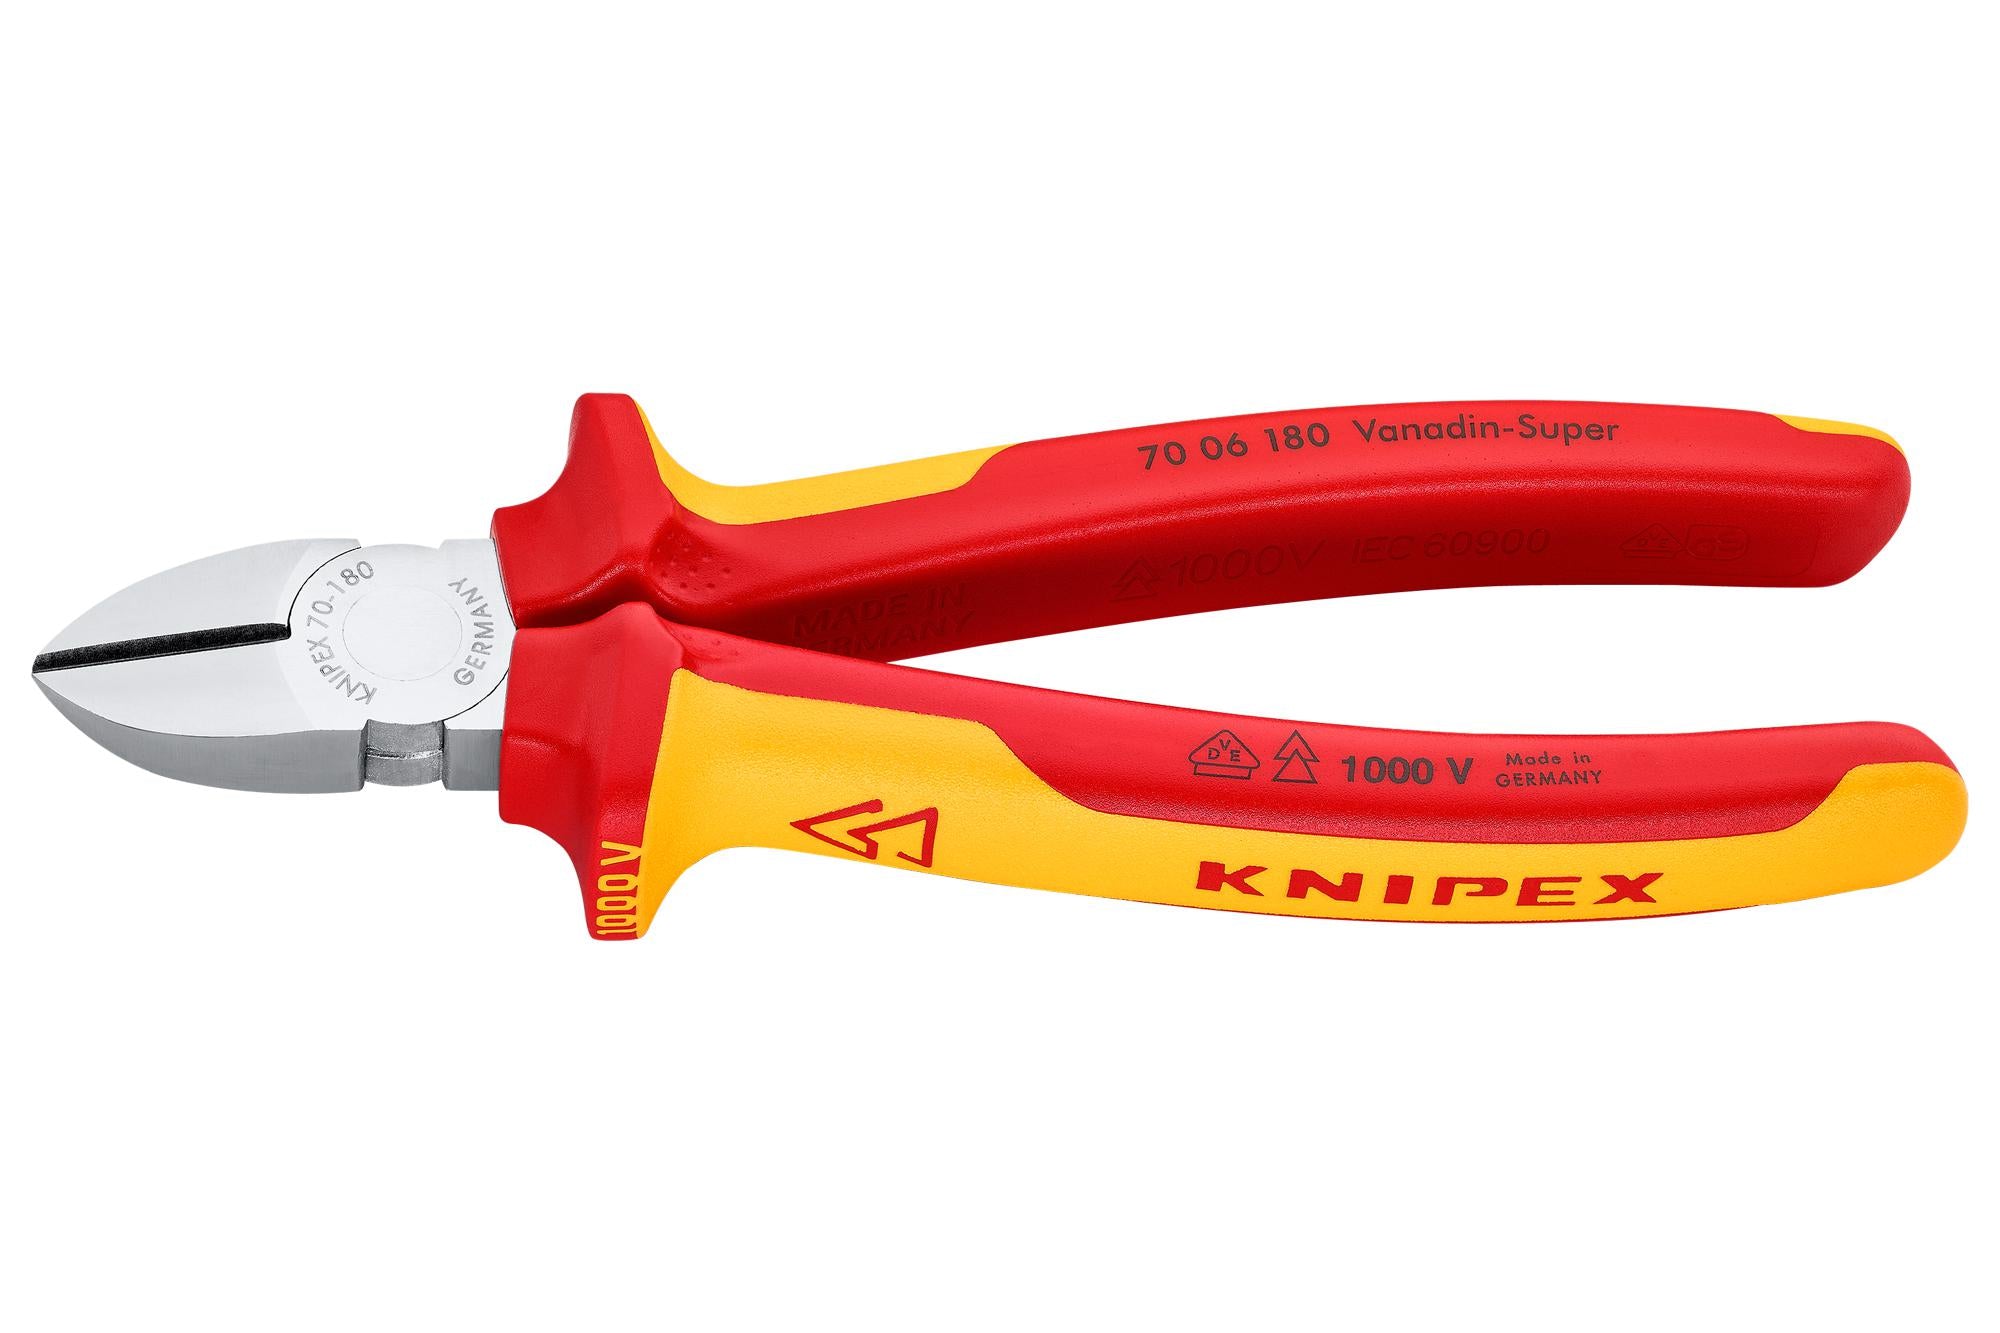 70 06 180 CUTTER, SIDE, VDE KNIPEX